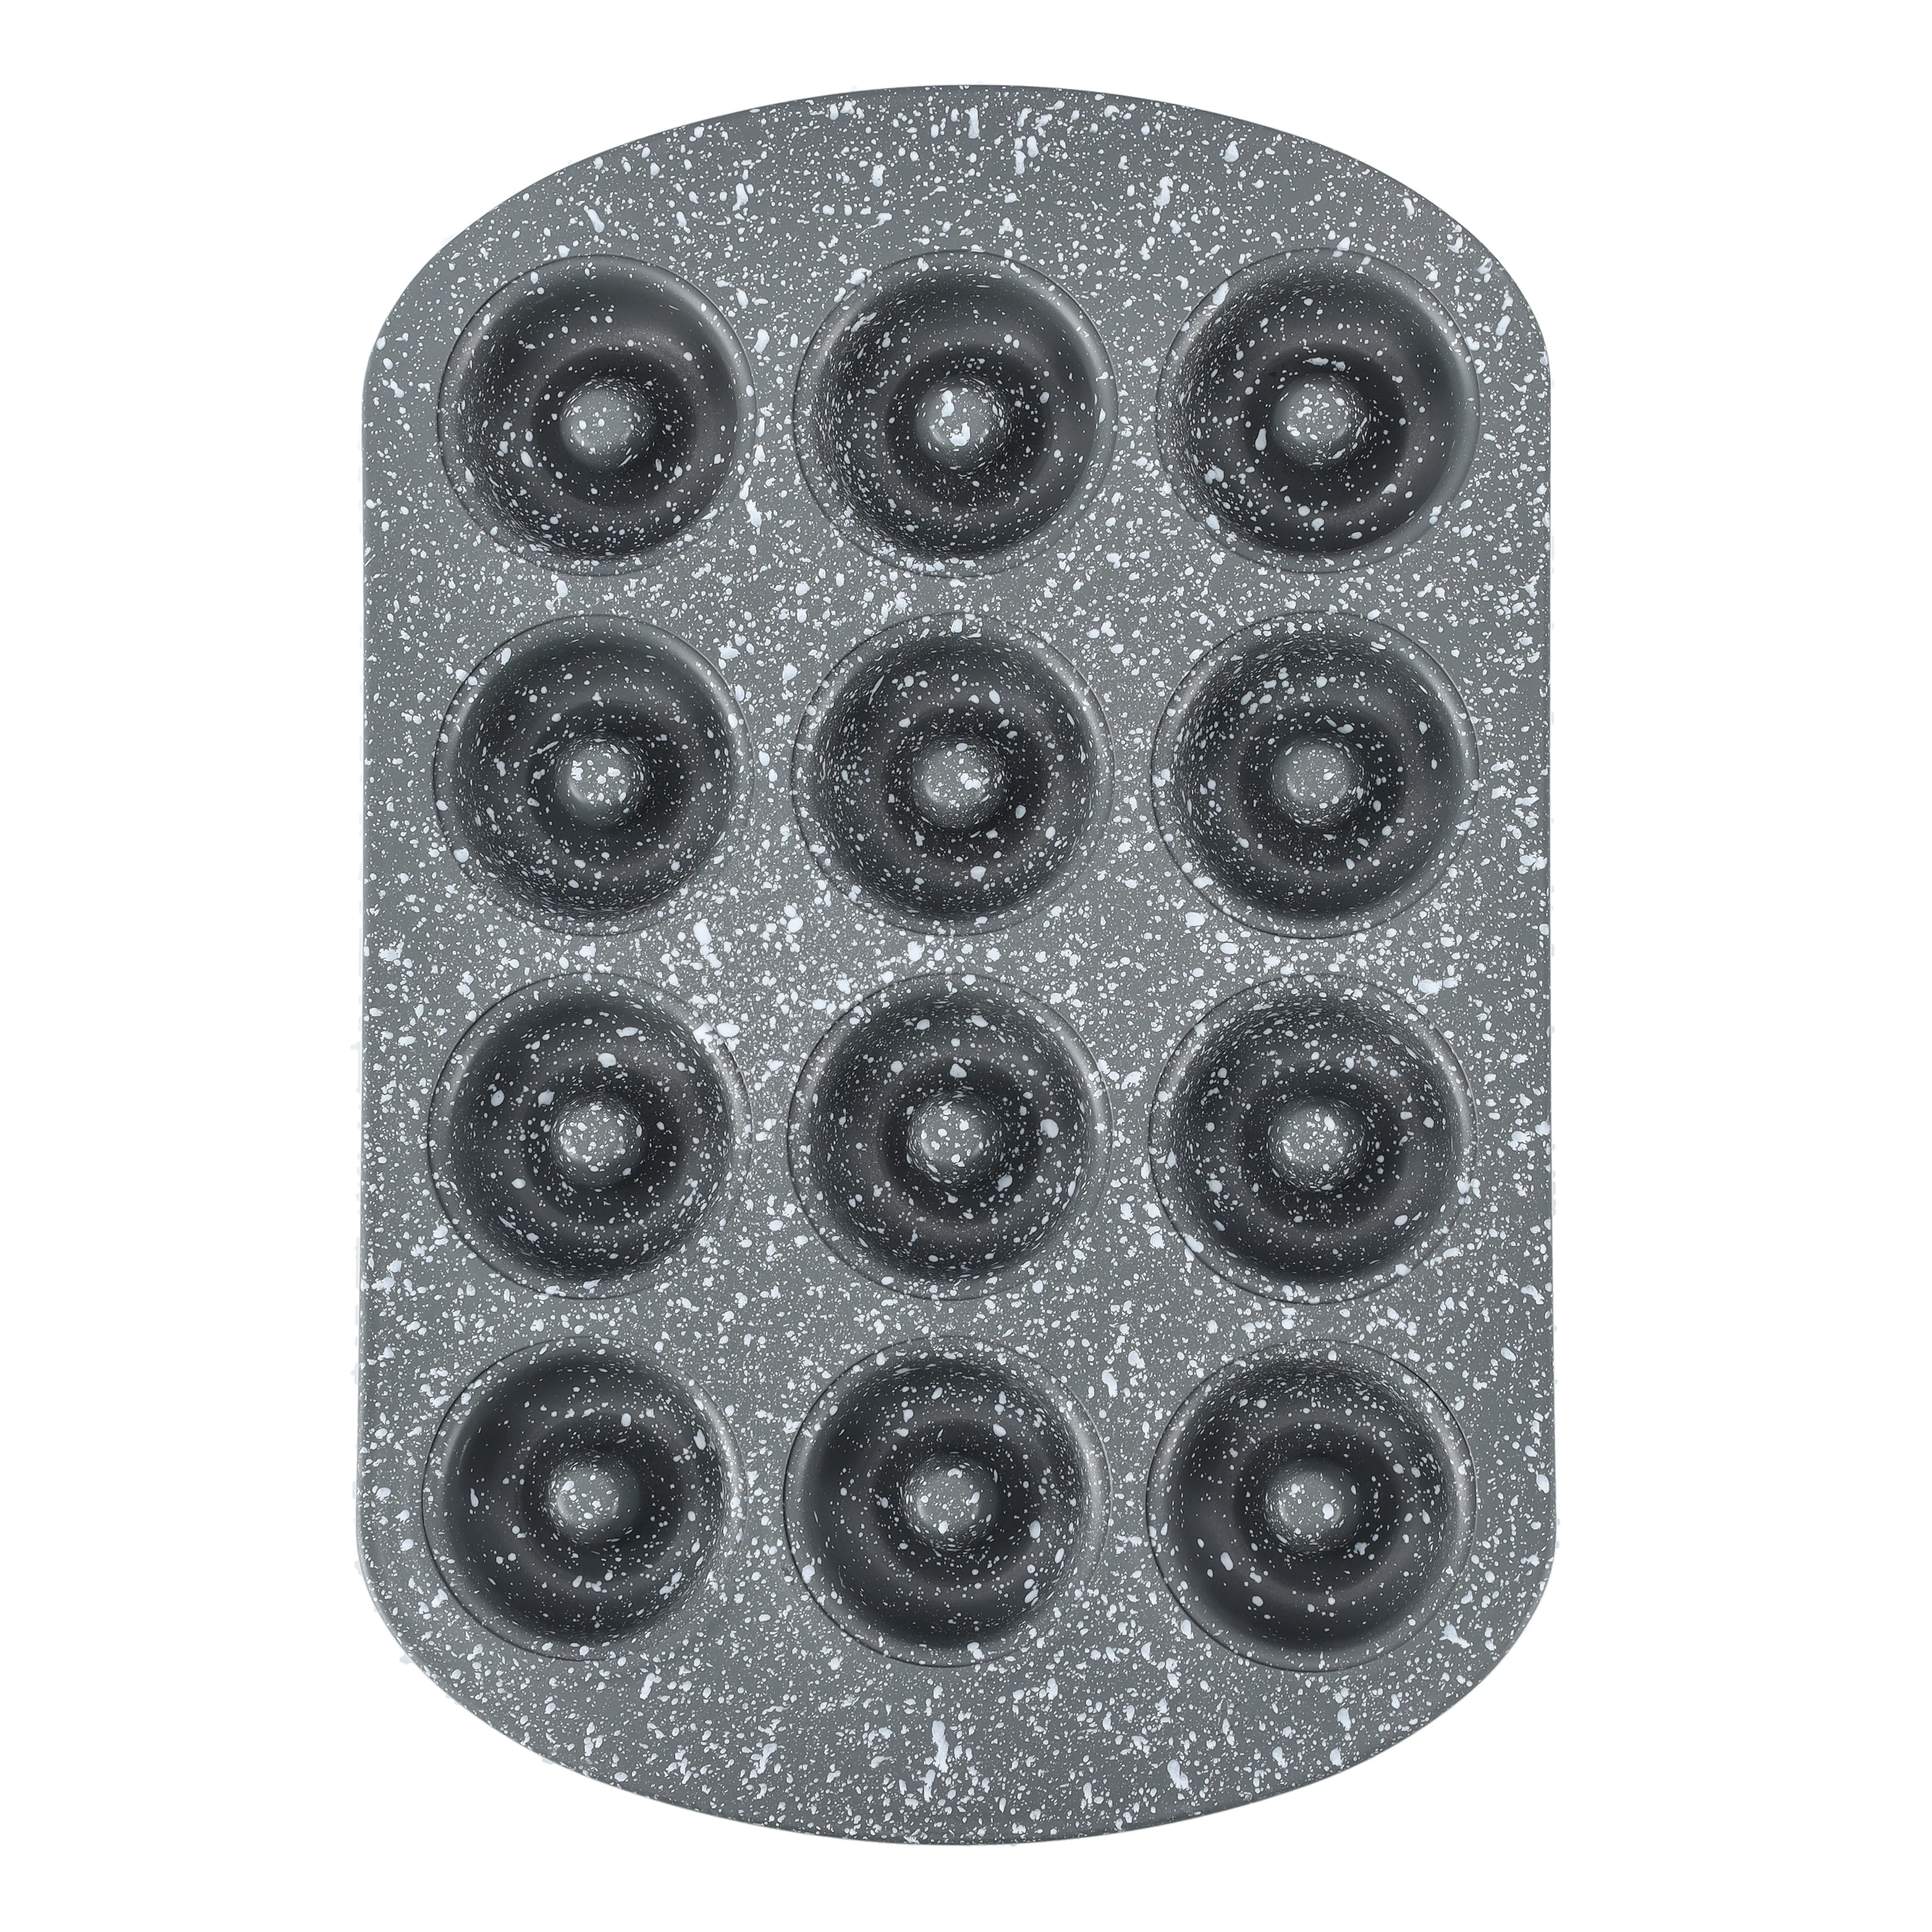 Royalford  Mini Donut Pan - Non Stick Granite Coating Baking with 12 Slots Reusable Bagel Mold Tray for Prolonged Use Oven Safe Baking Molds for Small Donuts, Cookie, Resin Art, & More